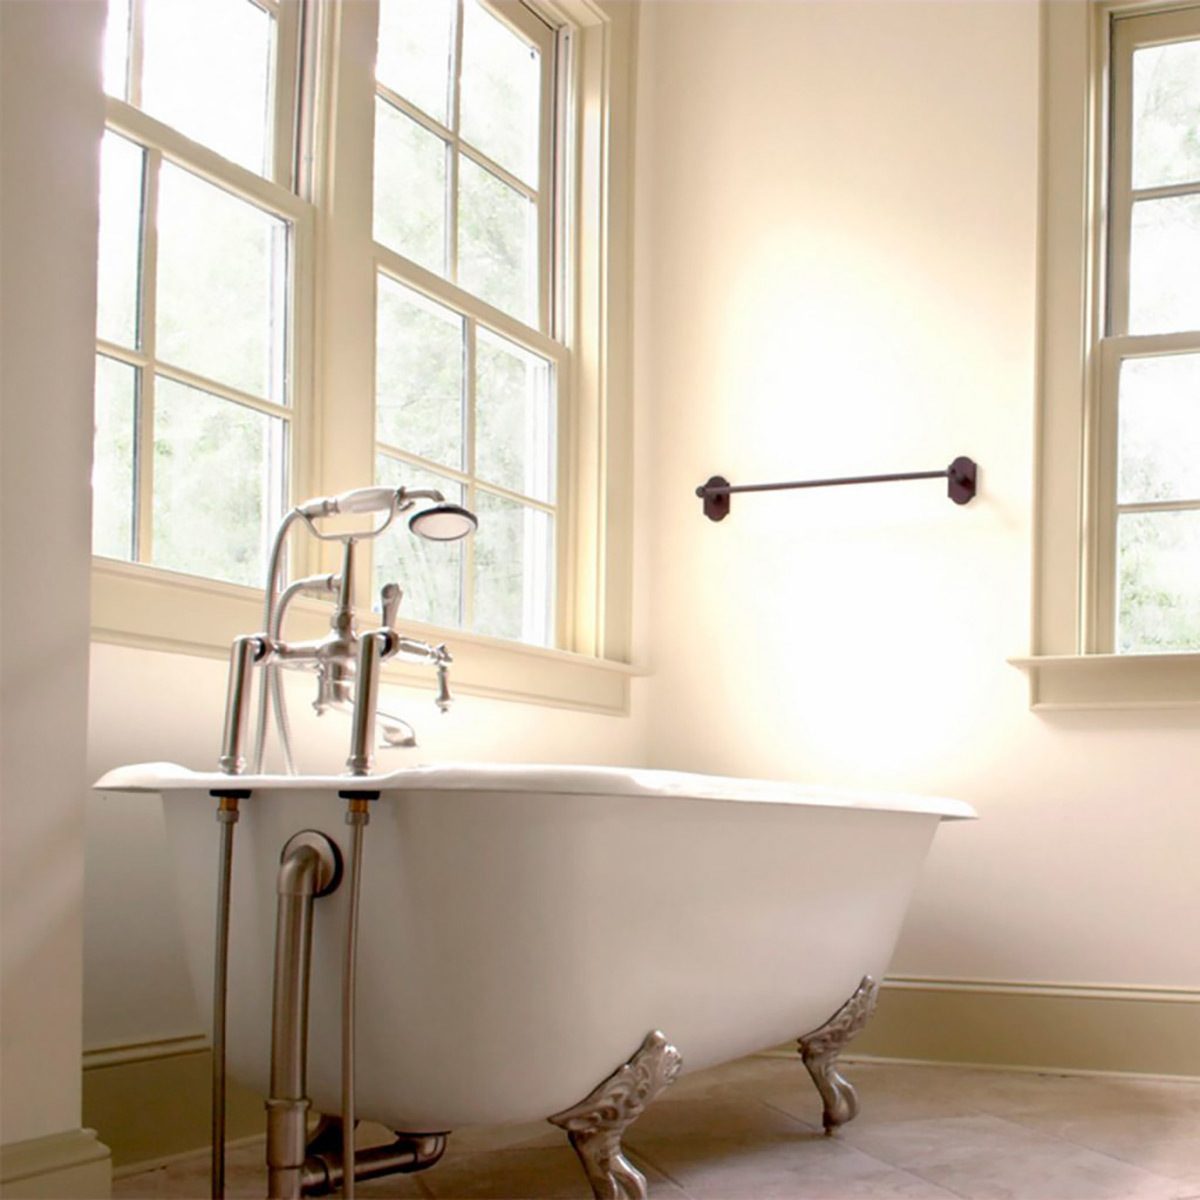 11 Things to Consider When Buying a New Bathtub